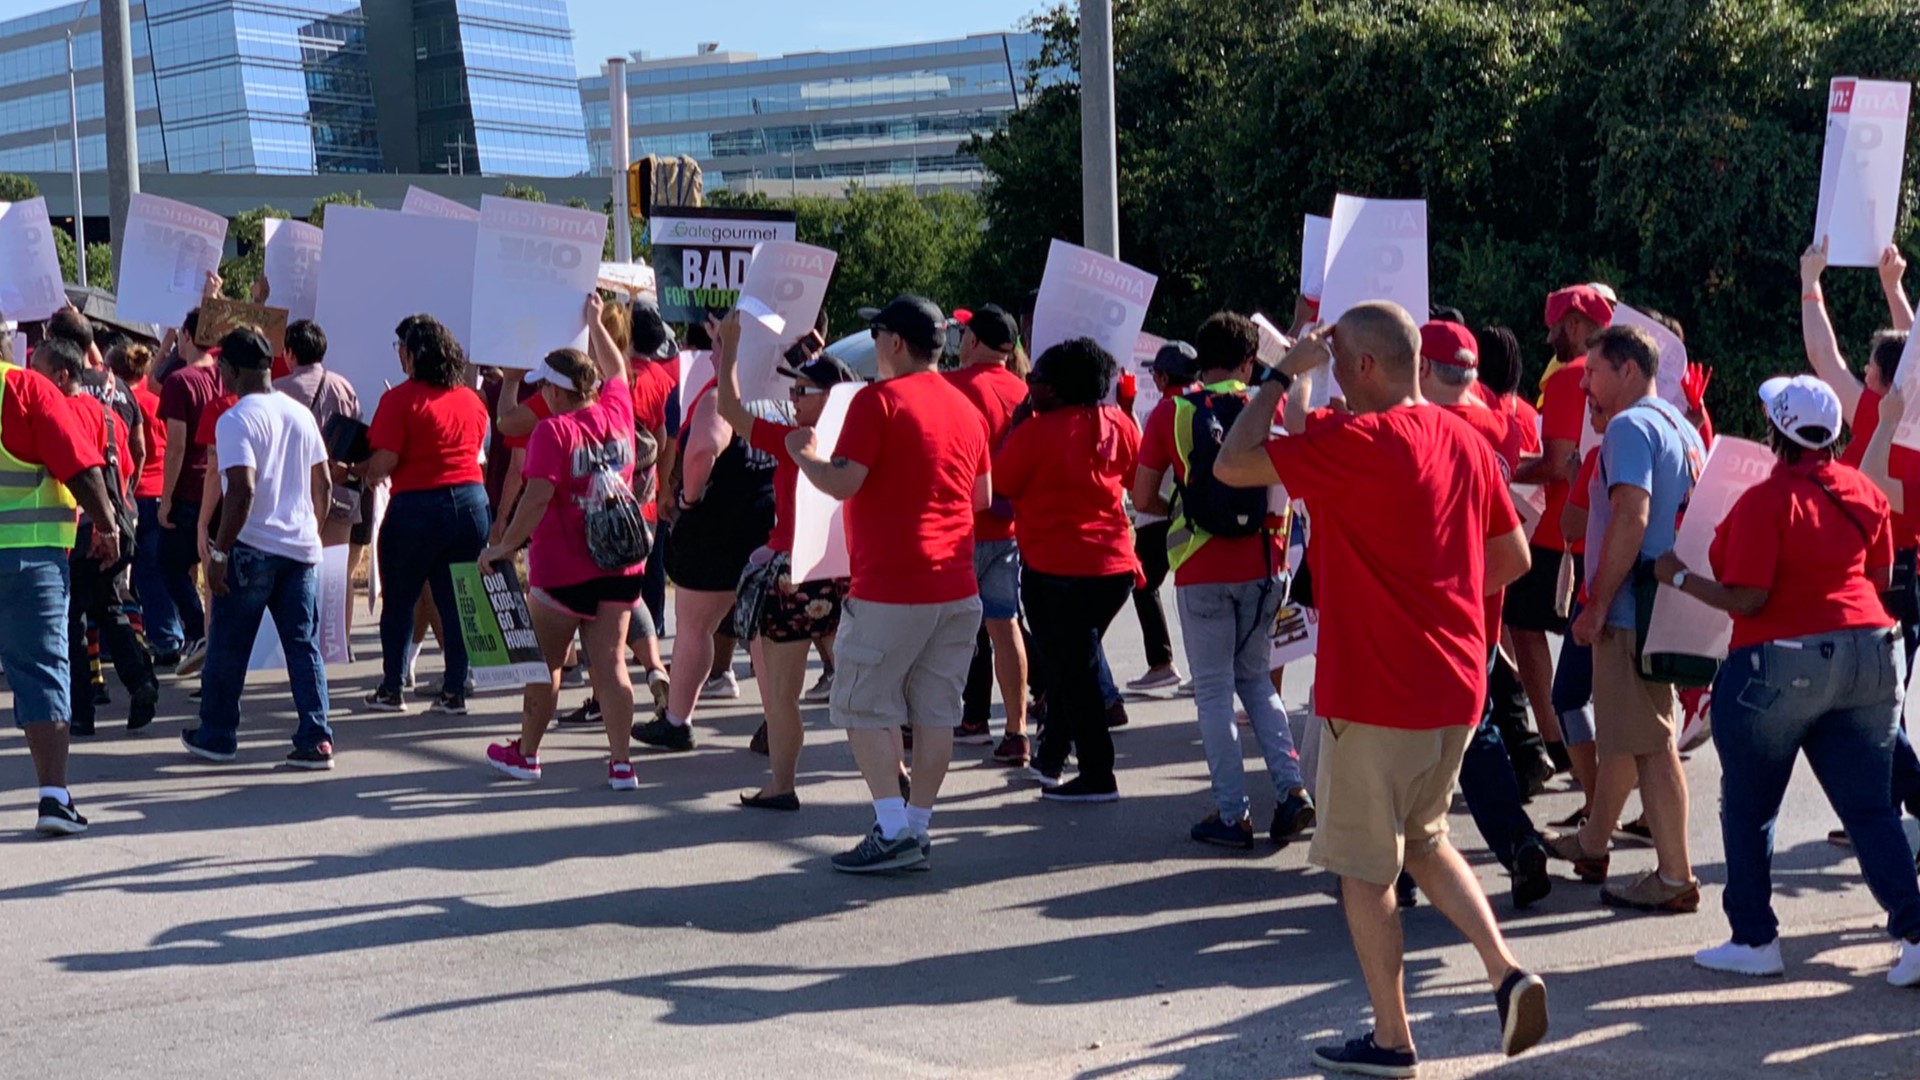 Employees of catering services that supply food on American Airlines flights are protesting Tuesday outside the airlines' headquarters in Fort Worth.